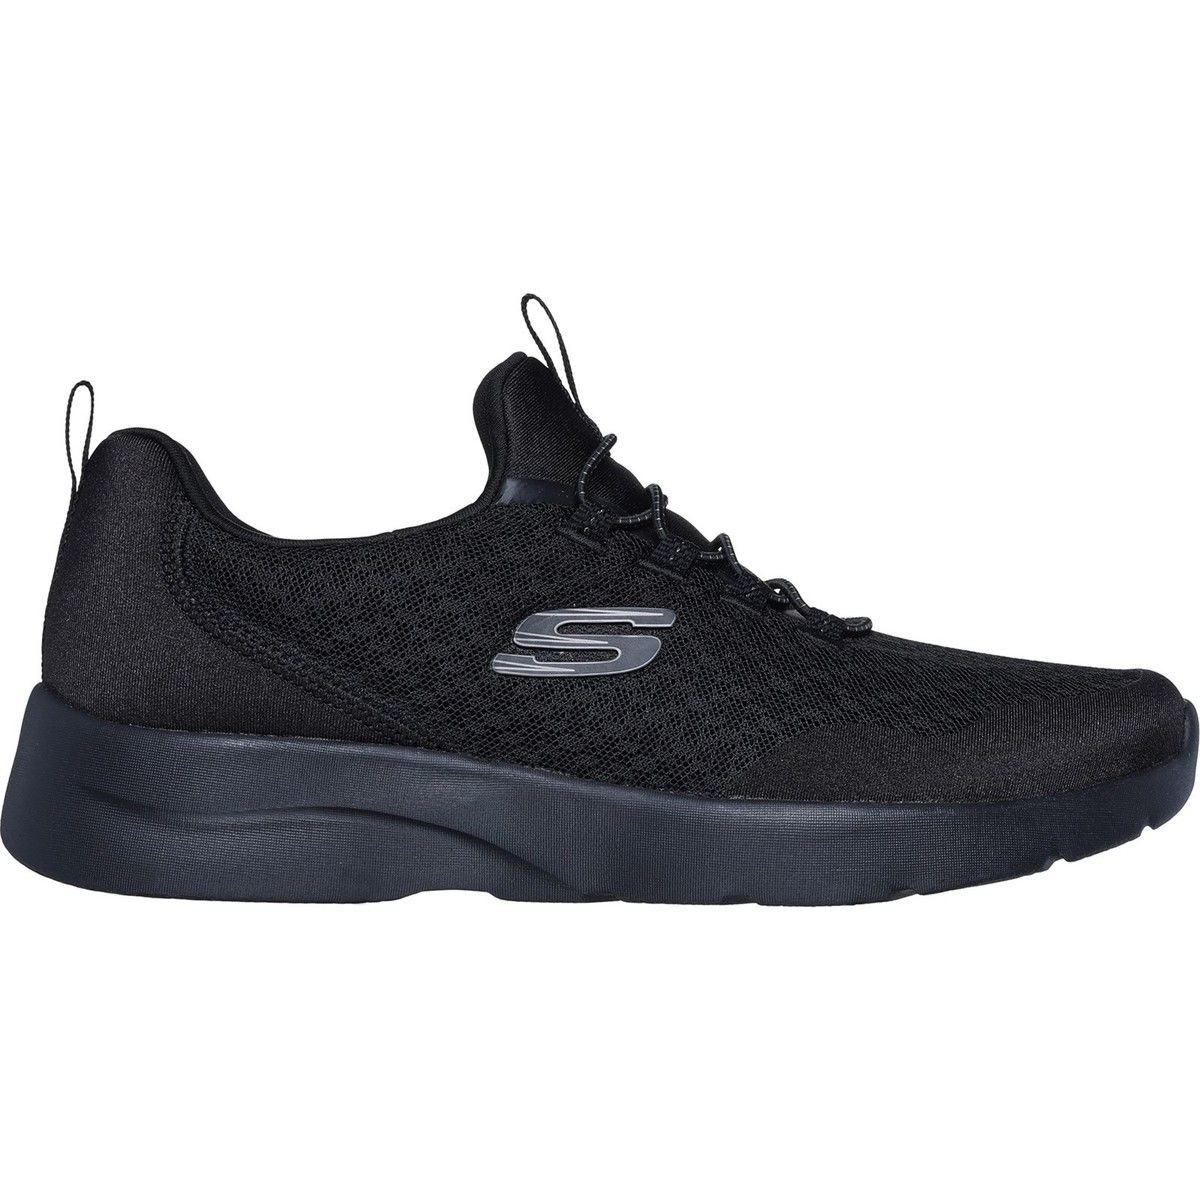 Skechers Dynamight 2.0 - Real Smooth BBK Black Womens trainers